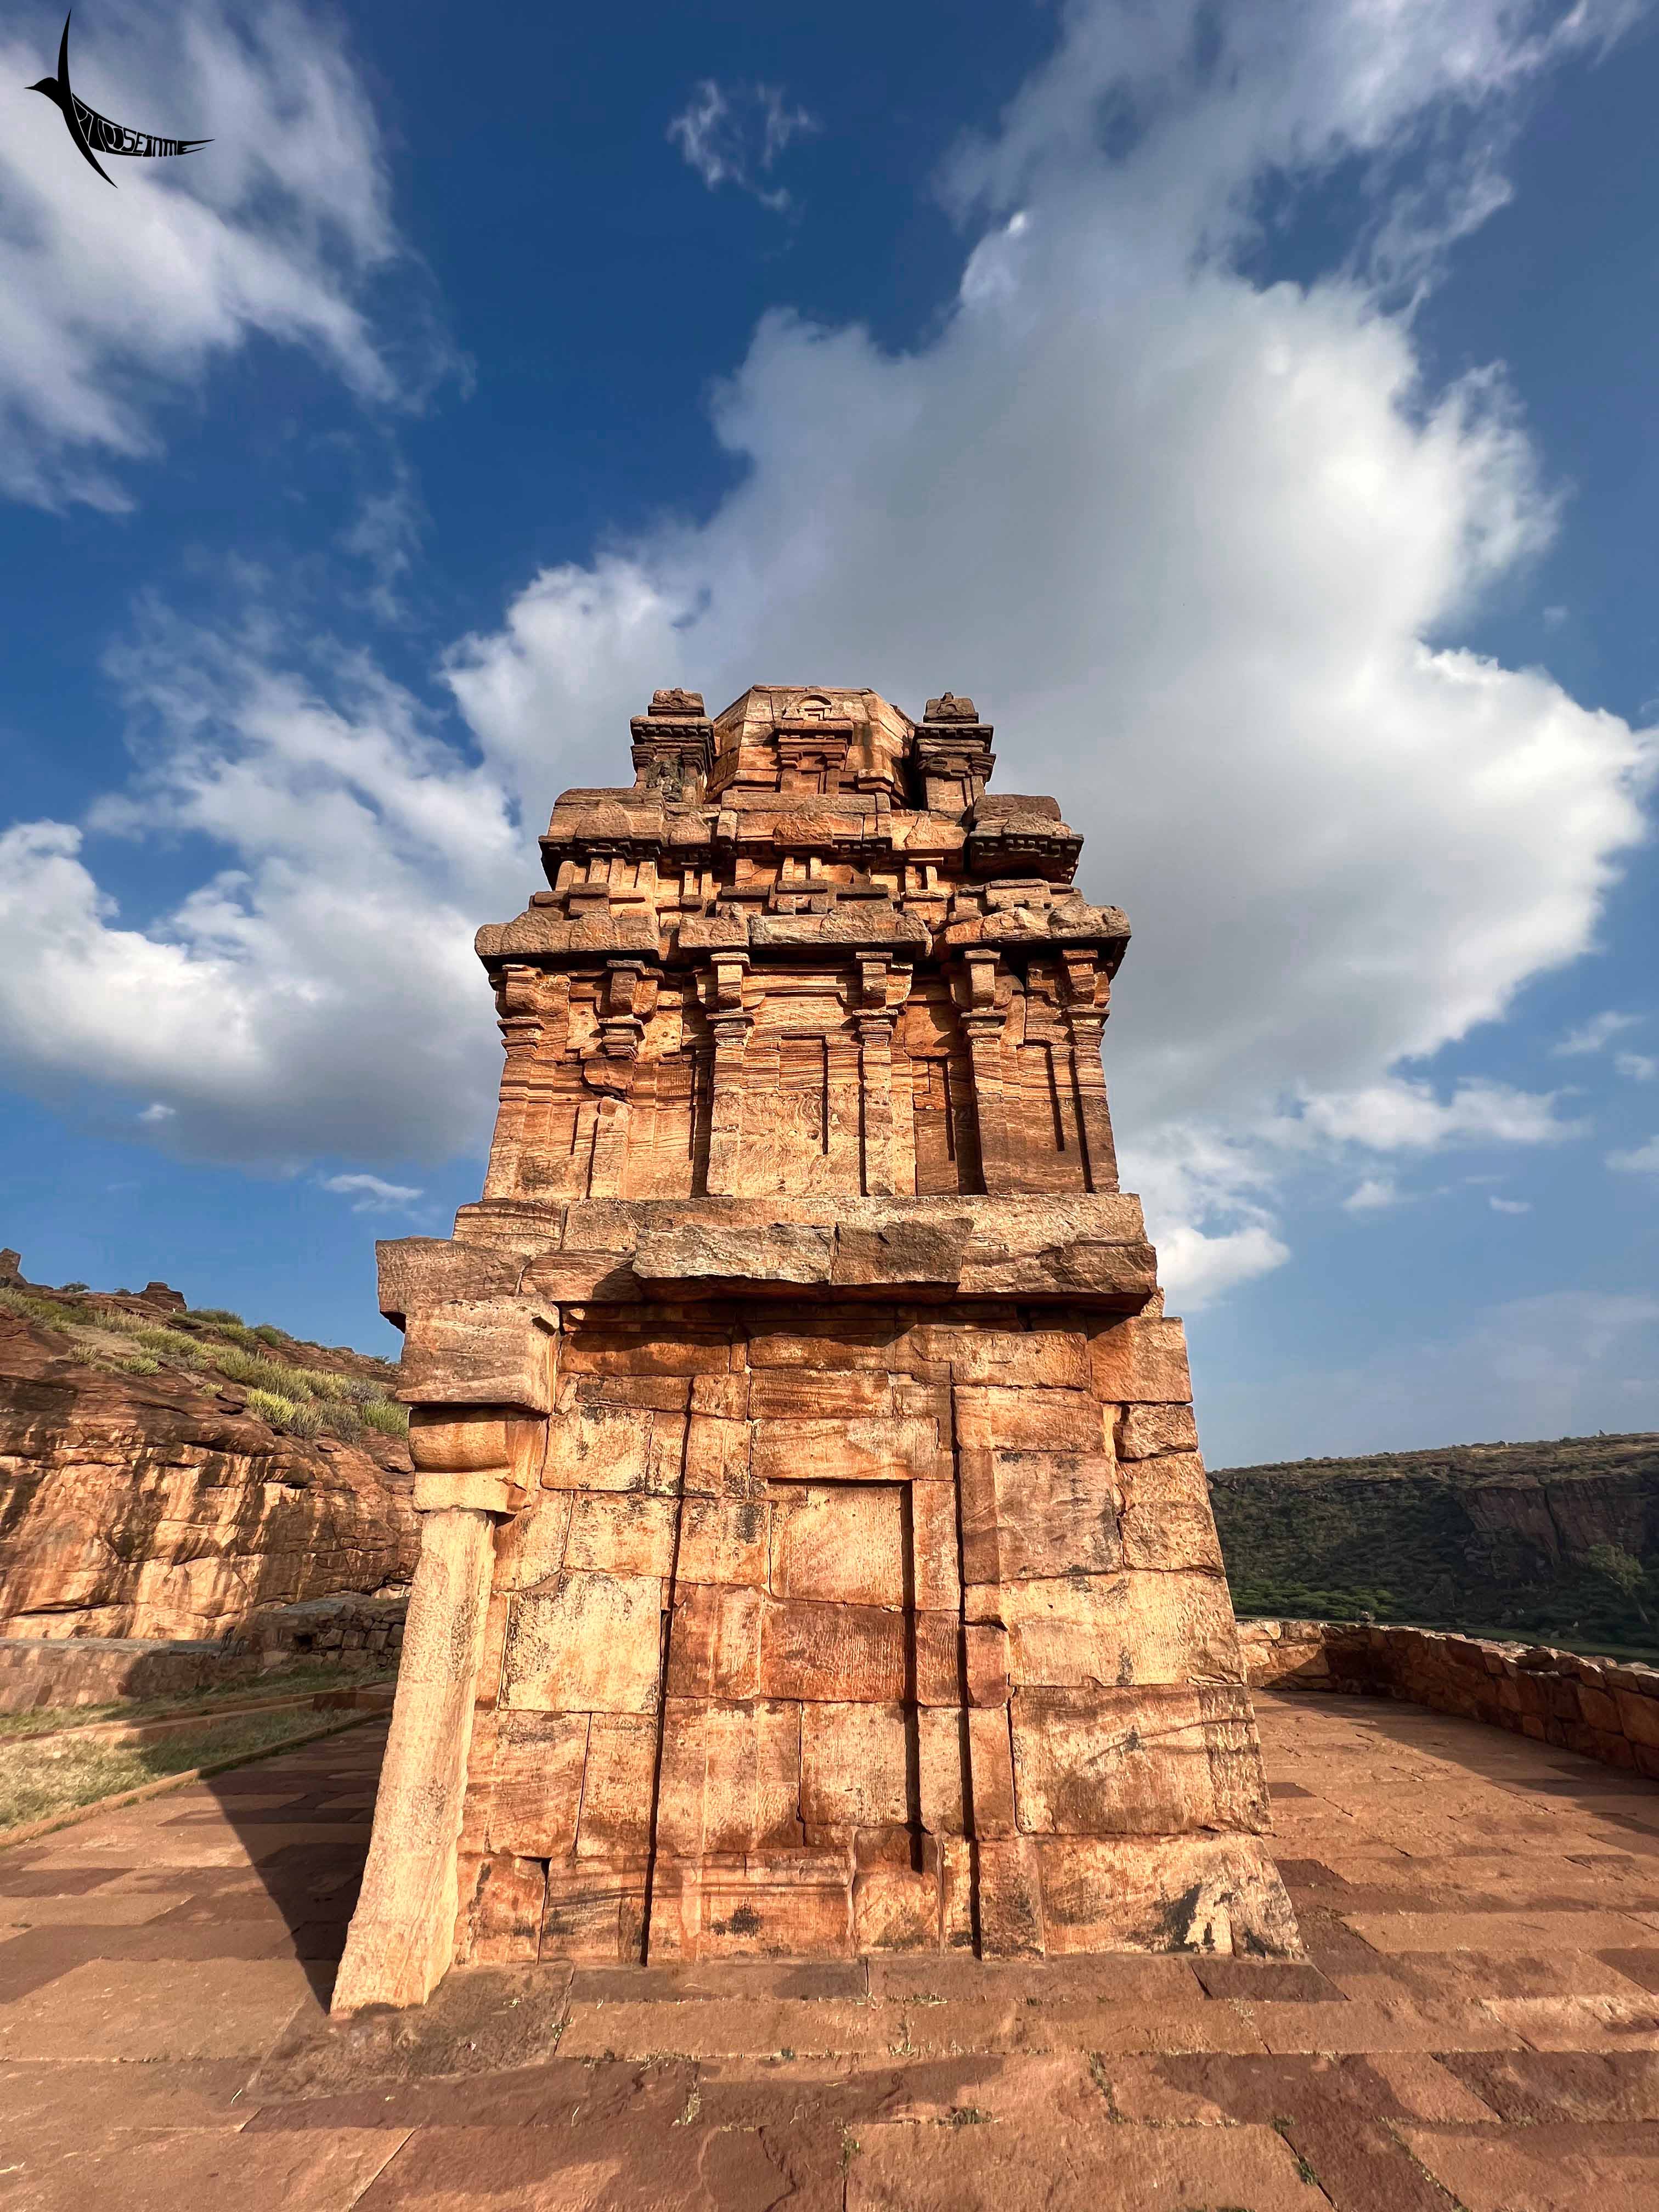 Temple in the Badami fort